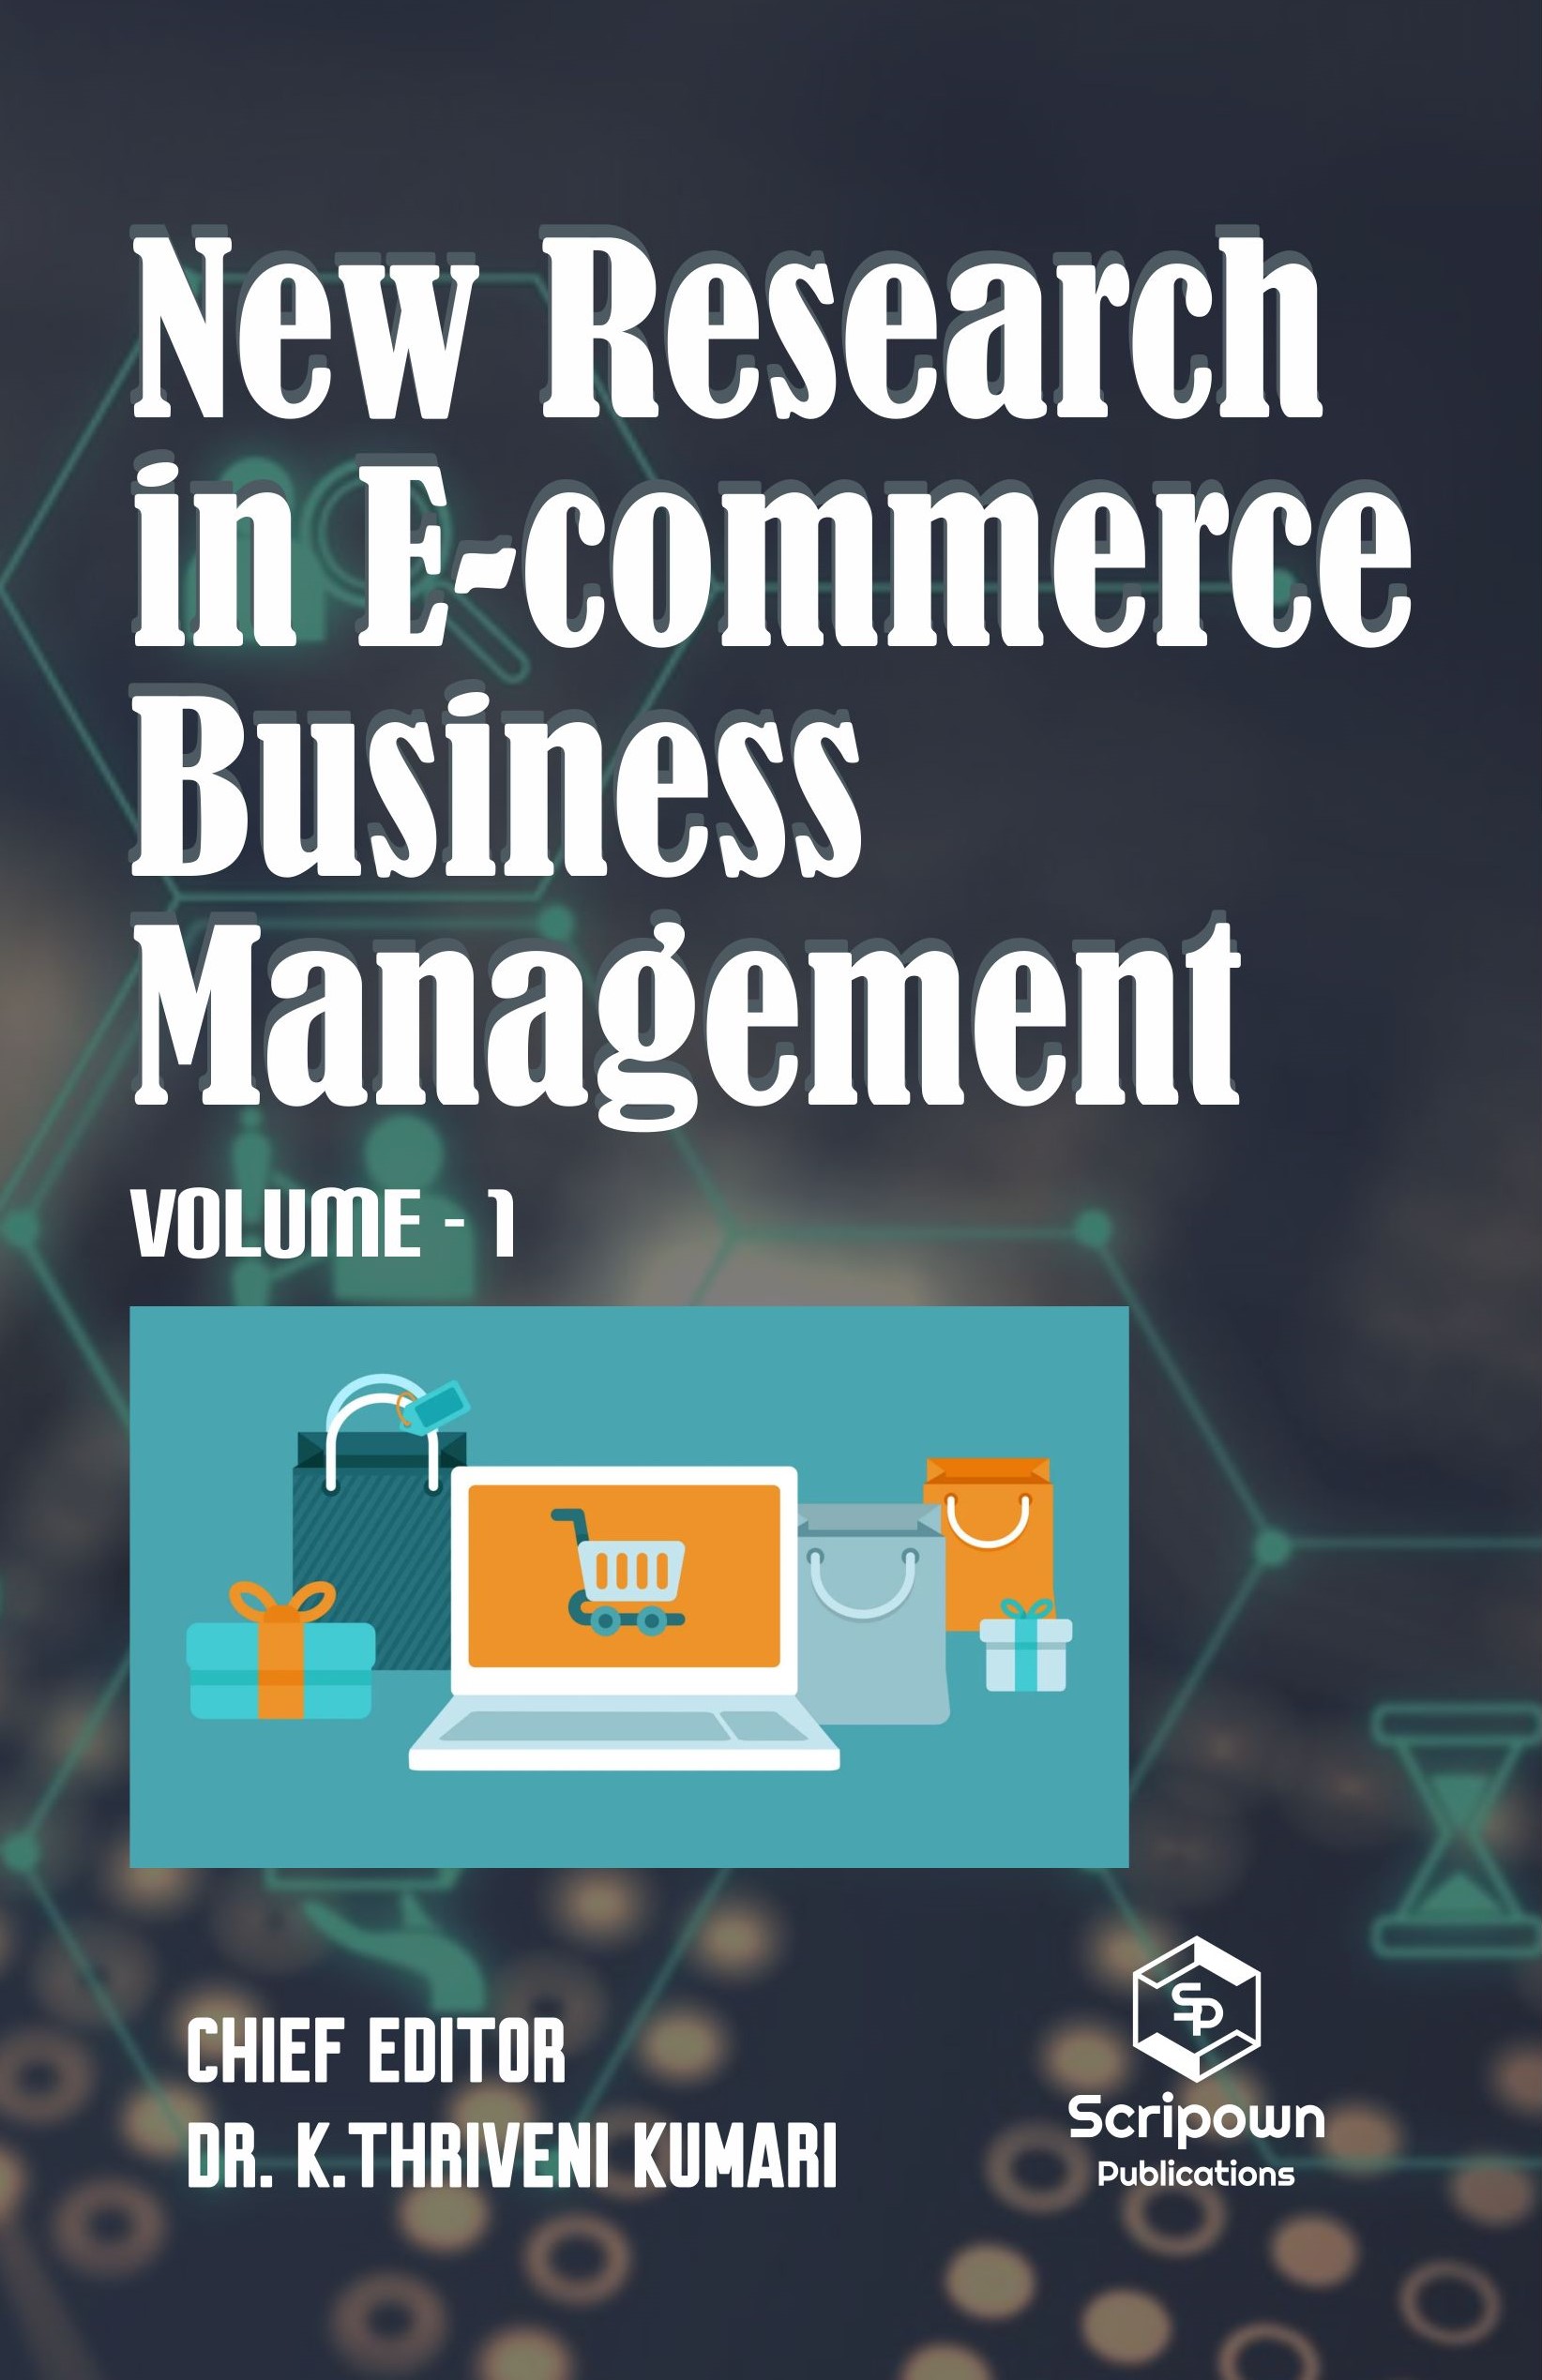 New Research in E-commerce Business Management (Volume - 1)